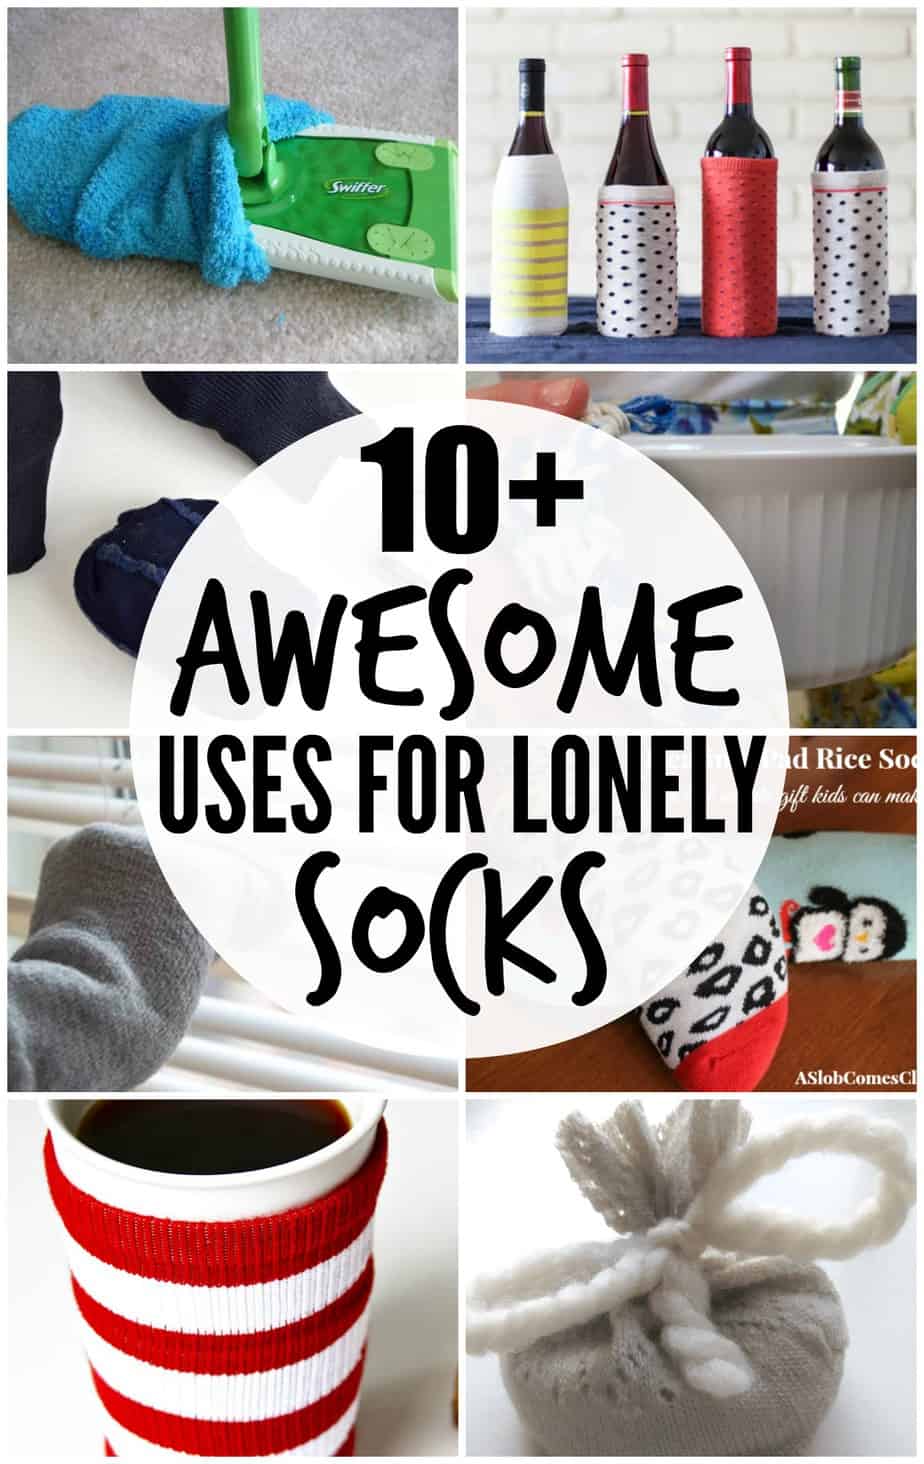 10+ Awesome Uses for lonely Socks